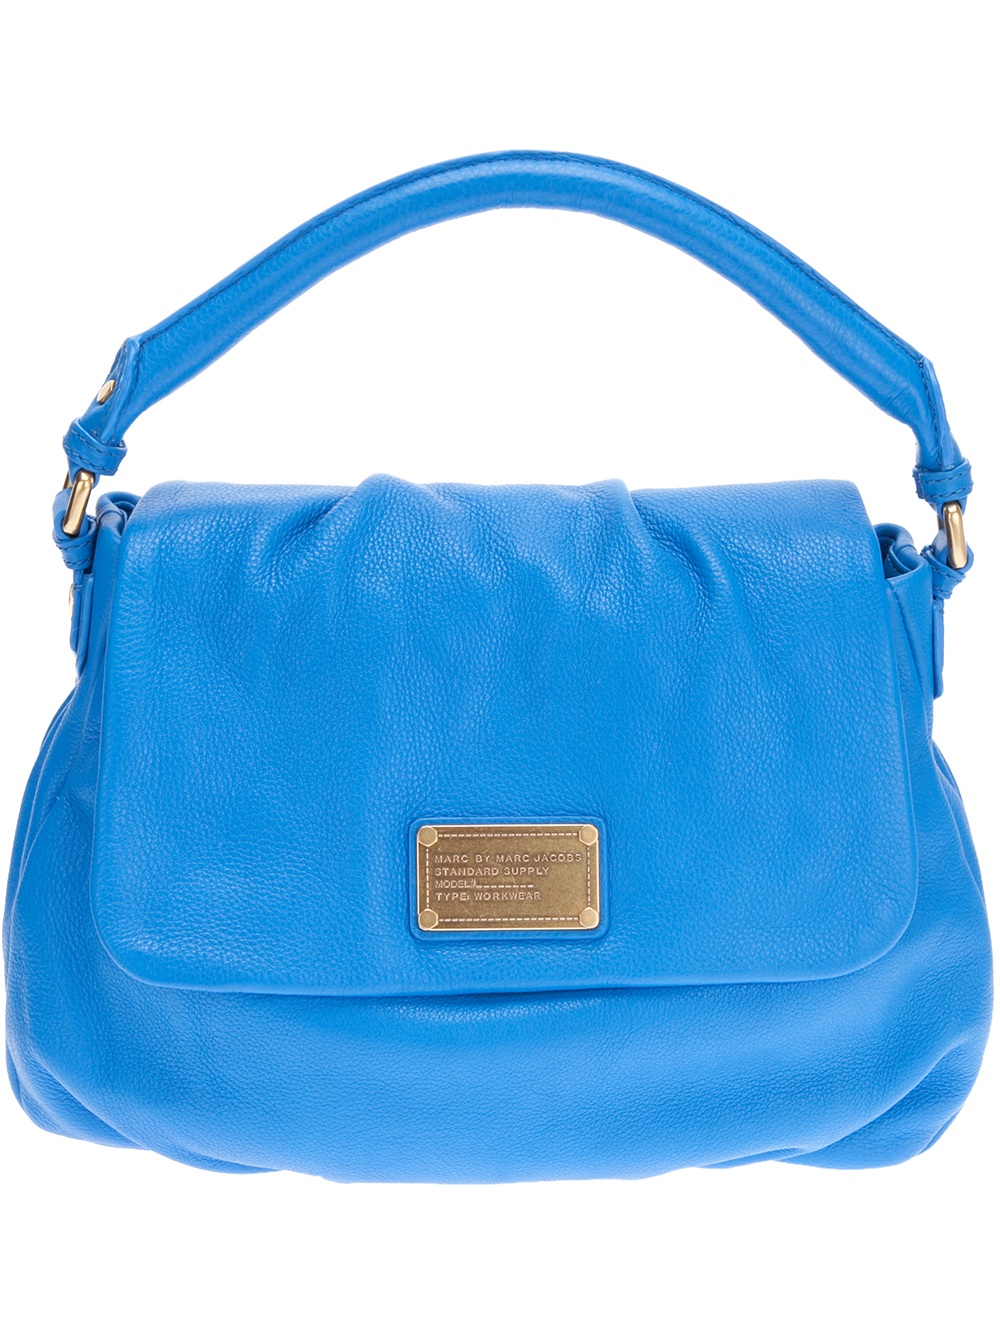 Marc By Marc Jacobs Lil Ukita Bag in Blue | Lyst